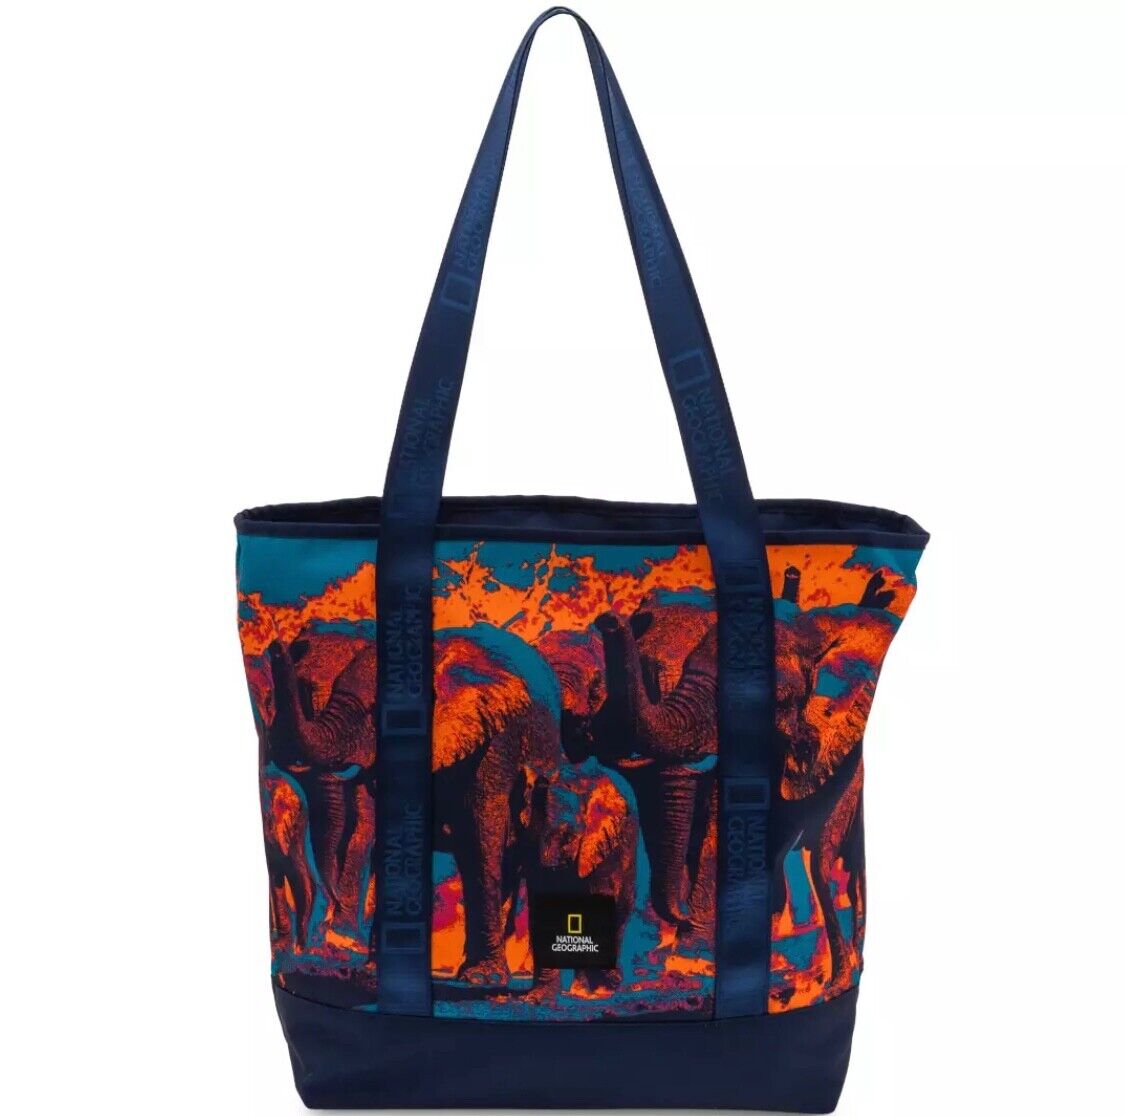 National Geographic Elephant Tote Bag New - Disney